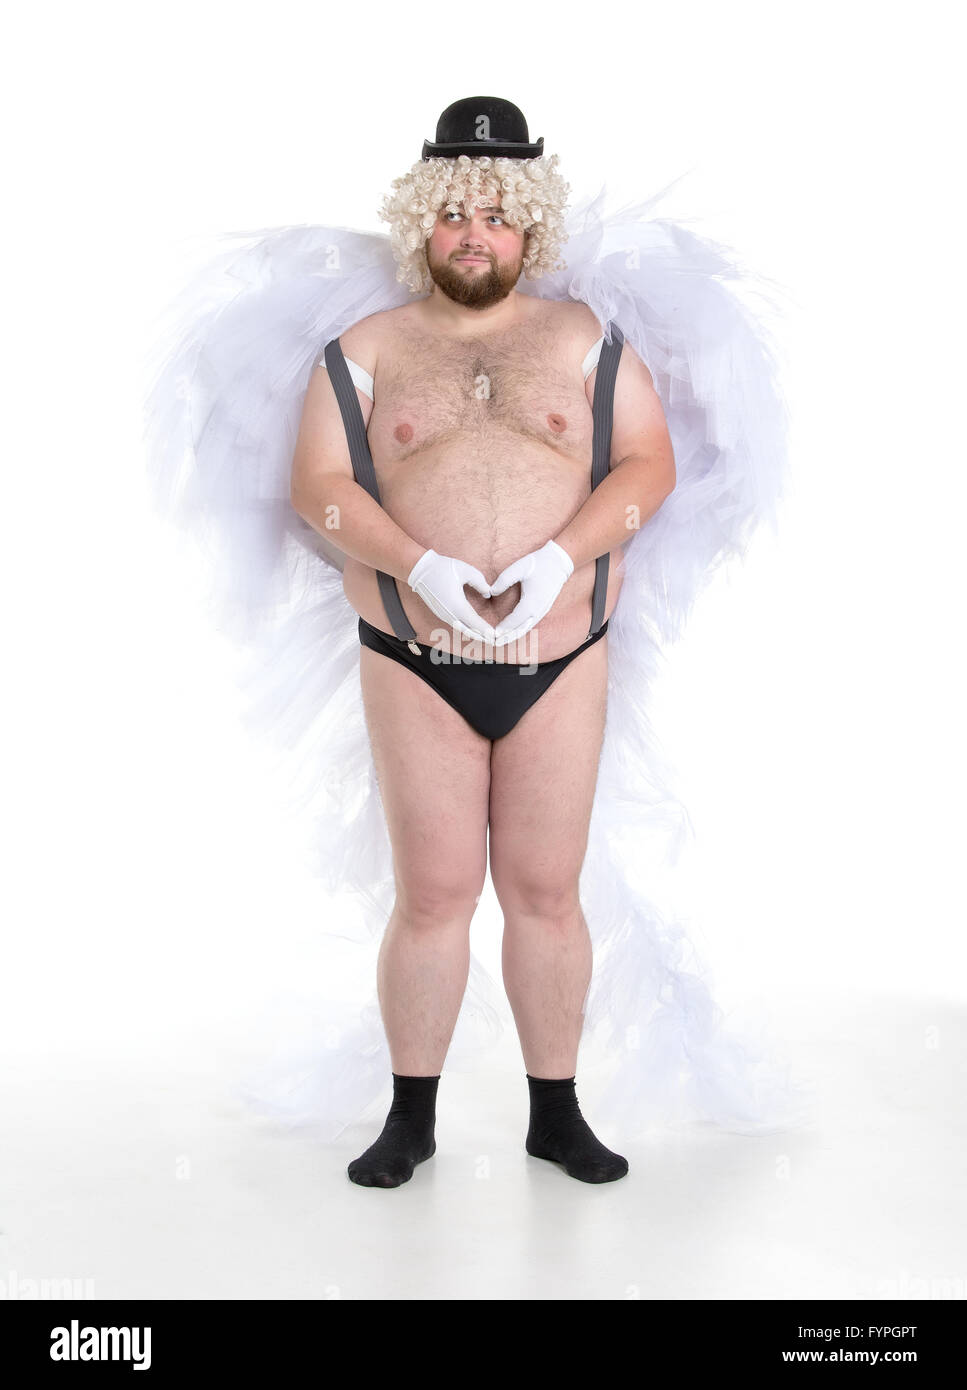 Funny Crazy Naked Fat Man in Panties with Angel Wings Stock Photo